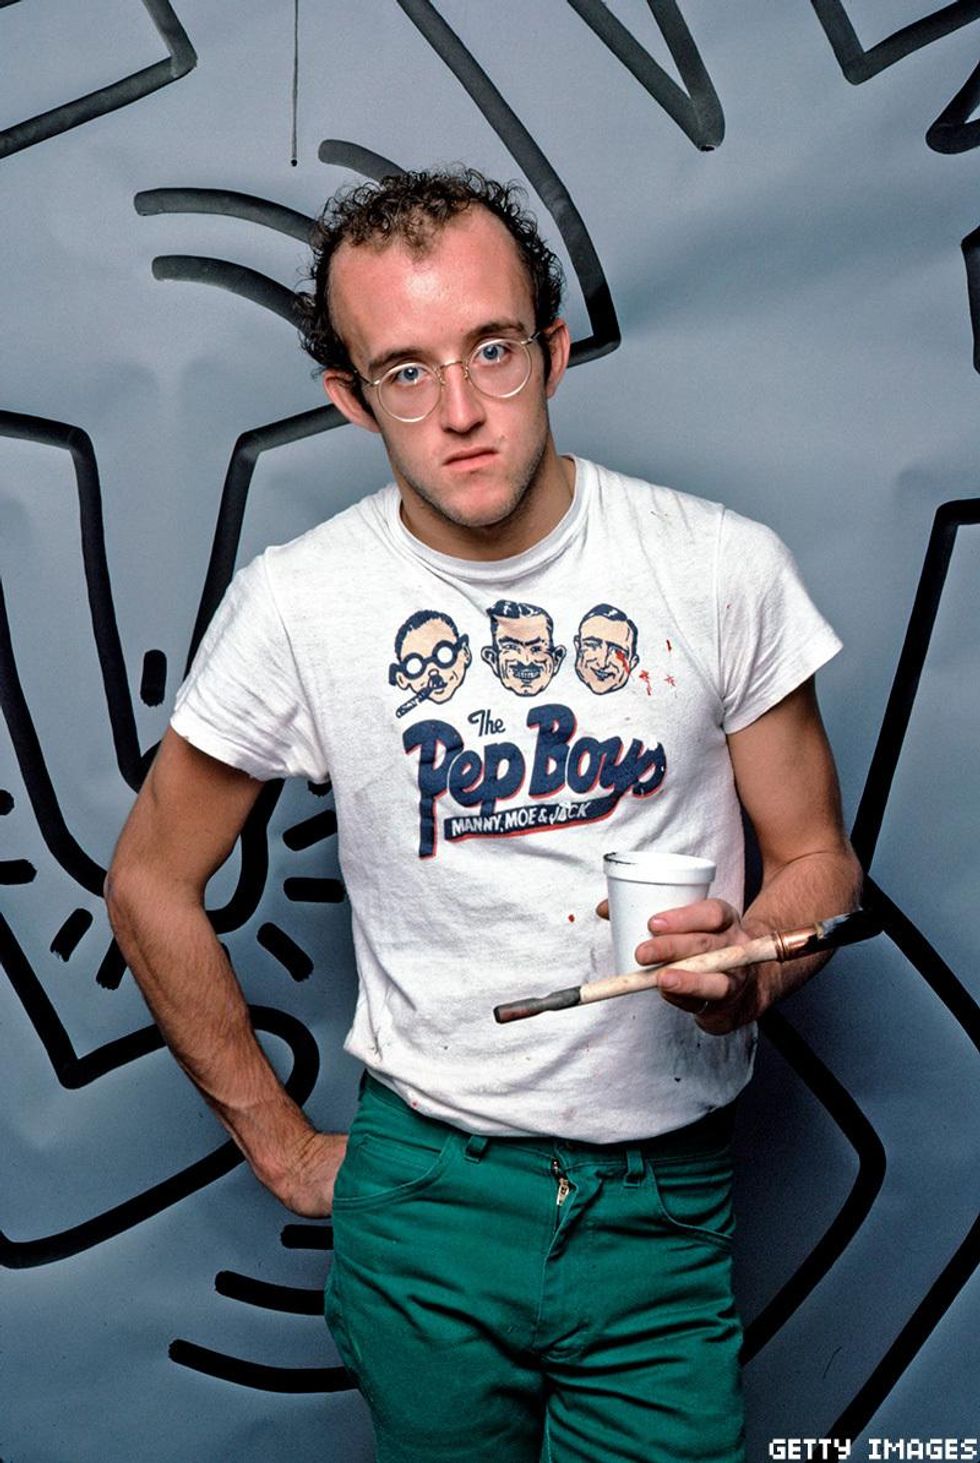 Street graffiti artist Keith Haring painted the famous We the Youth mural in Philadelphia.